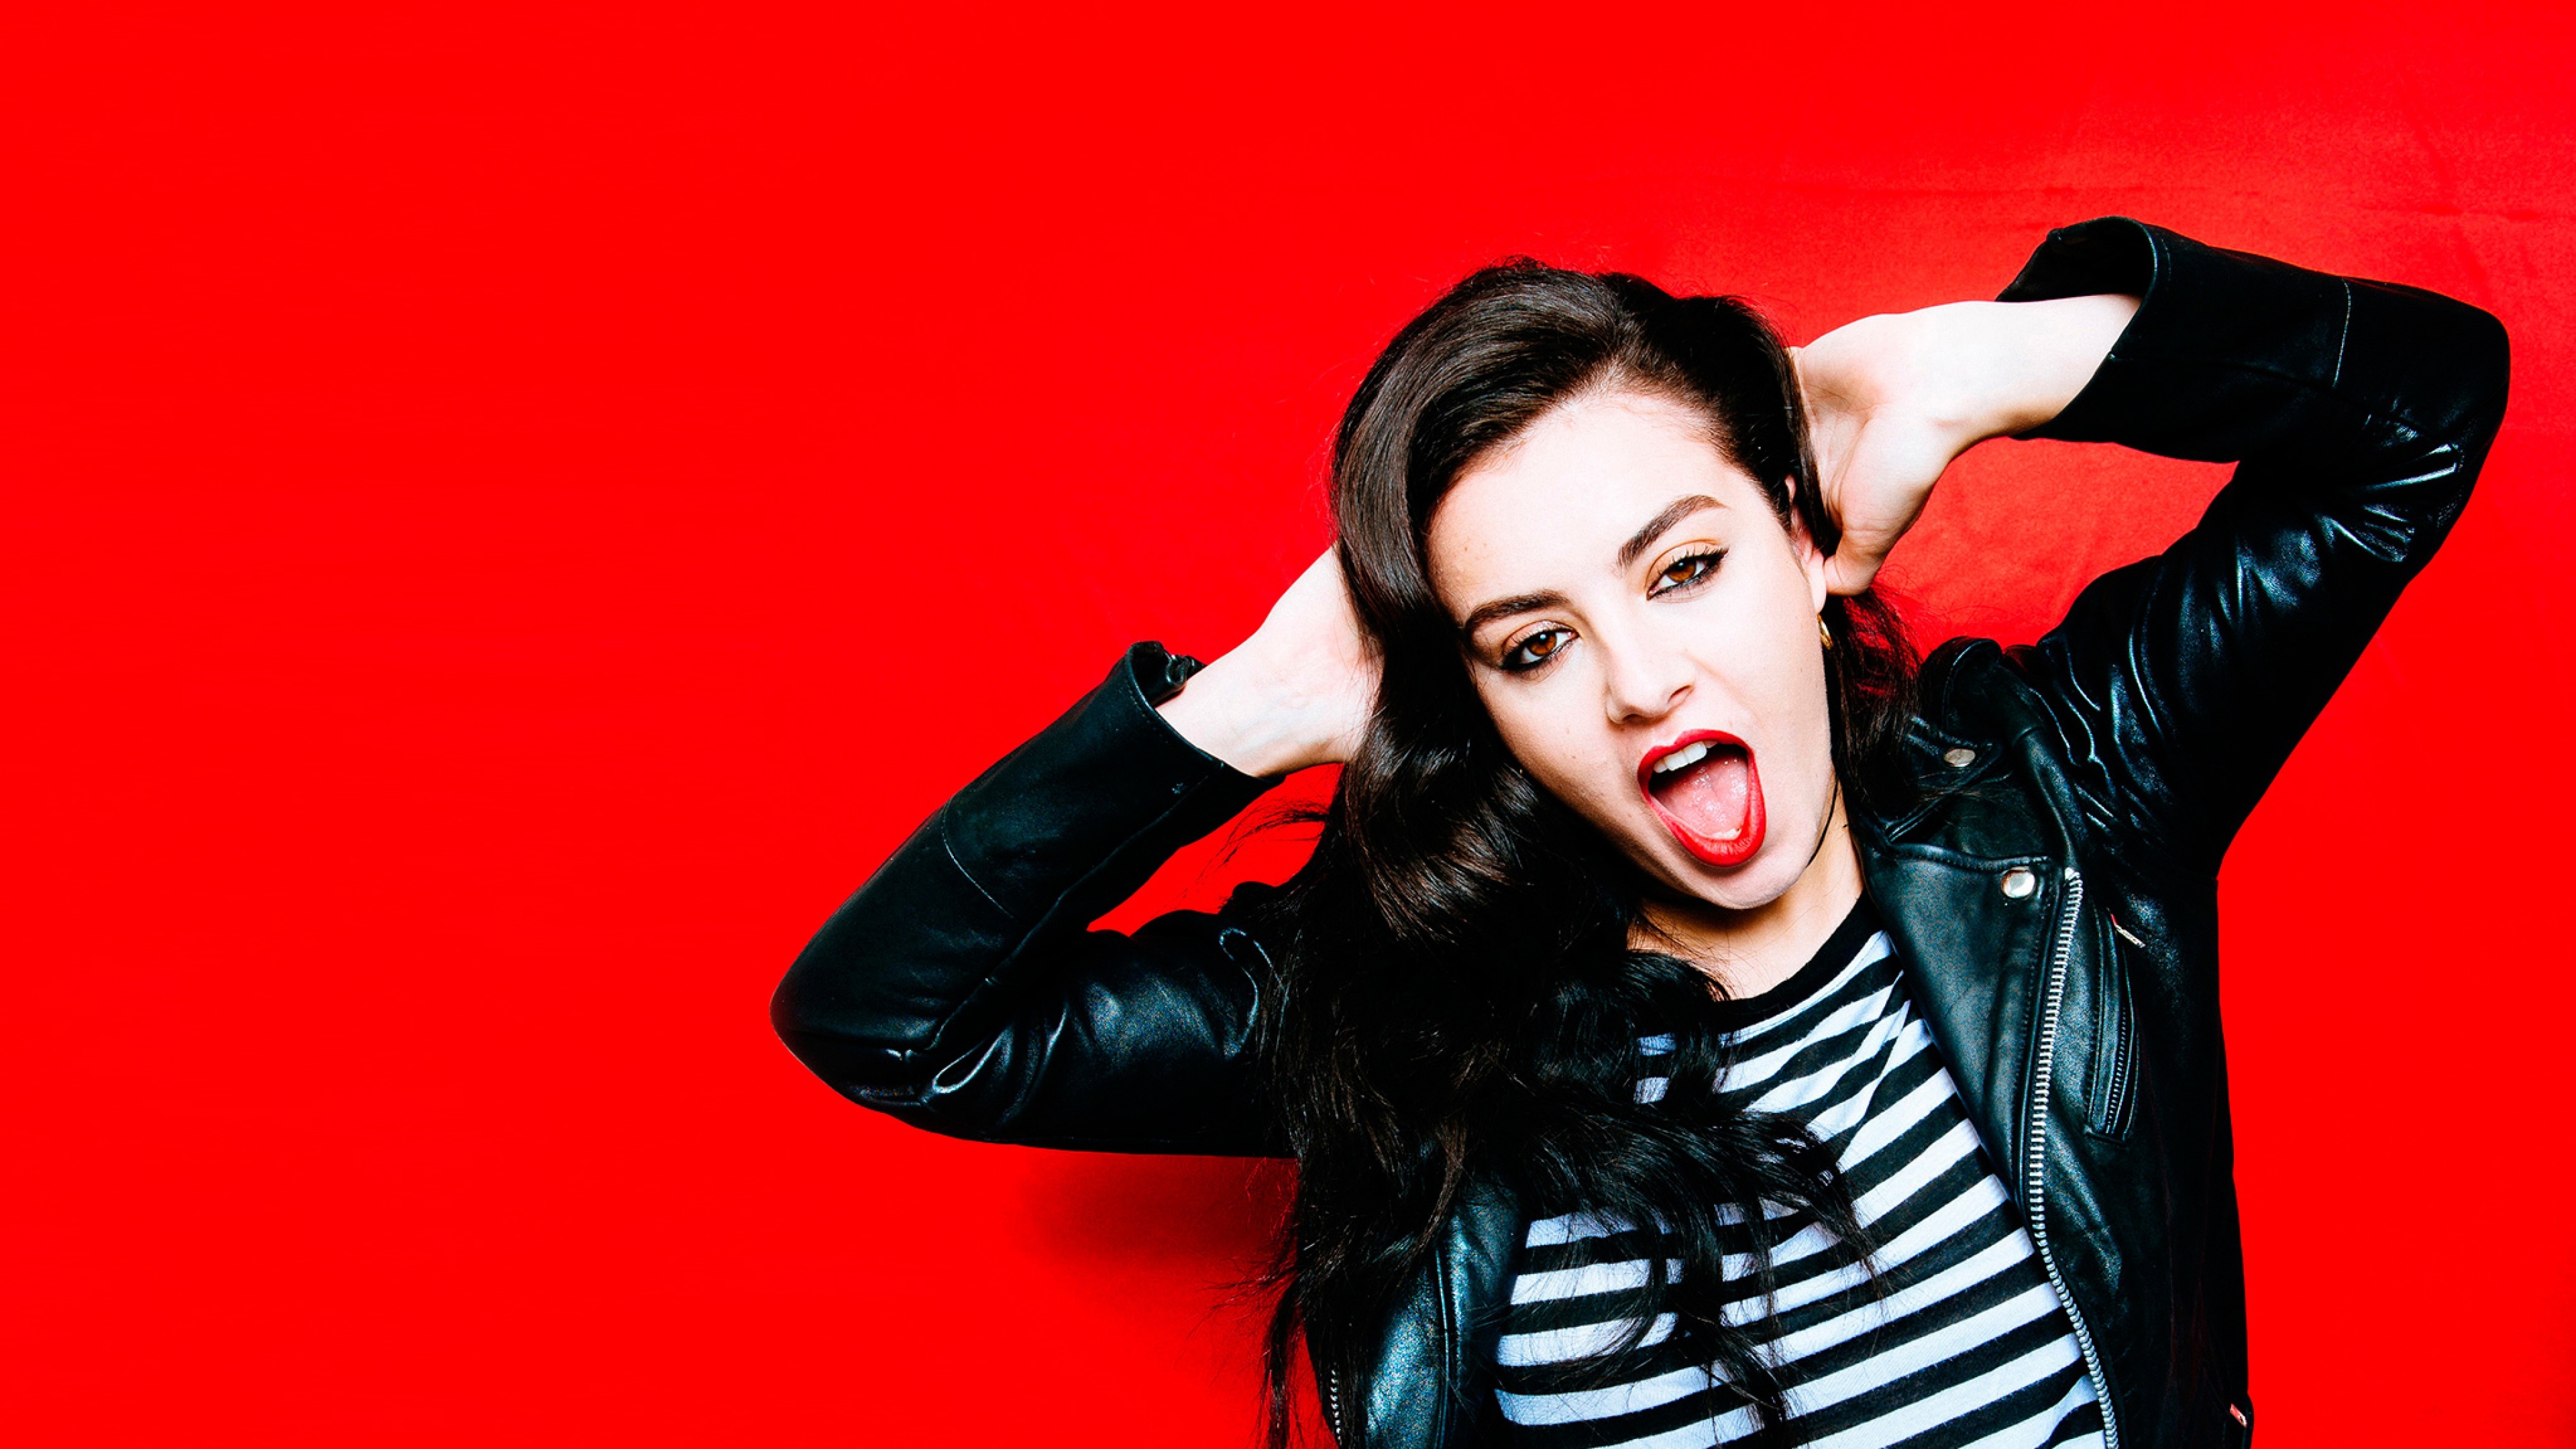 Charli XCX: Charlotte Emma Aitchison, an English singer and songwriter. 3840x2160 4K Background.